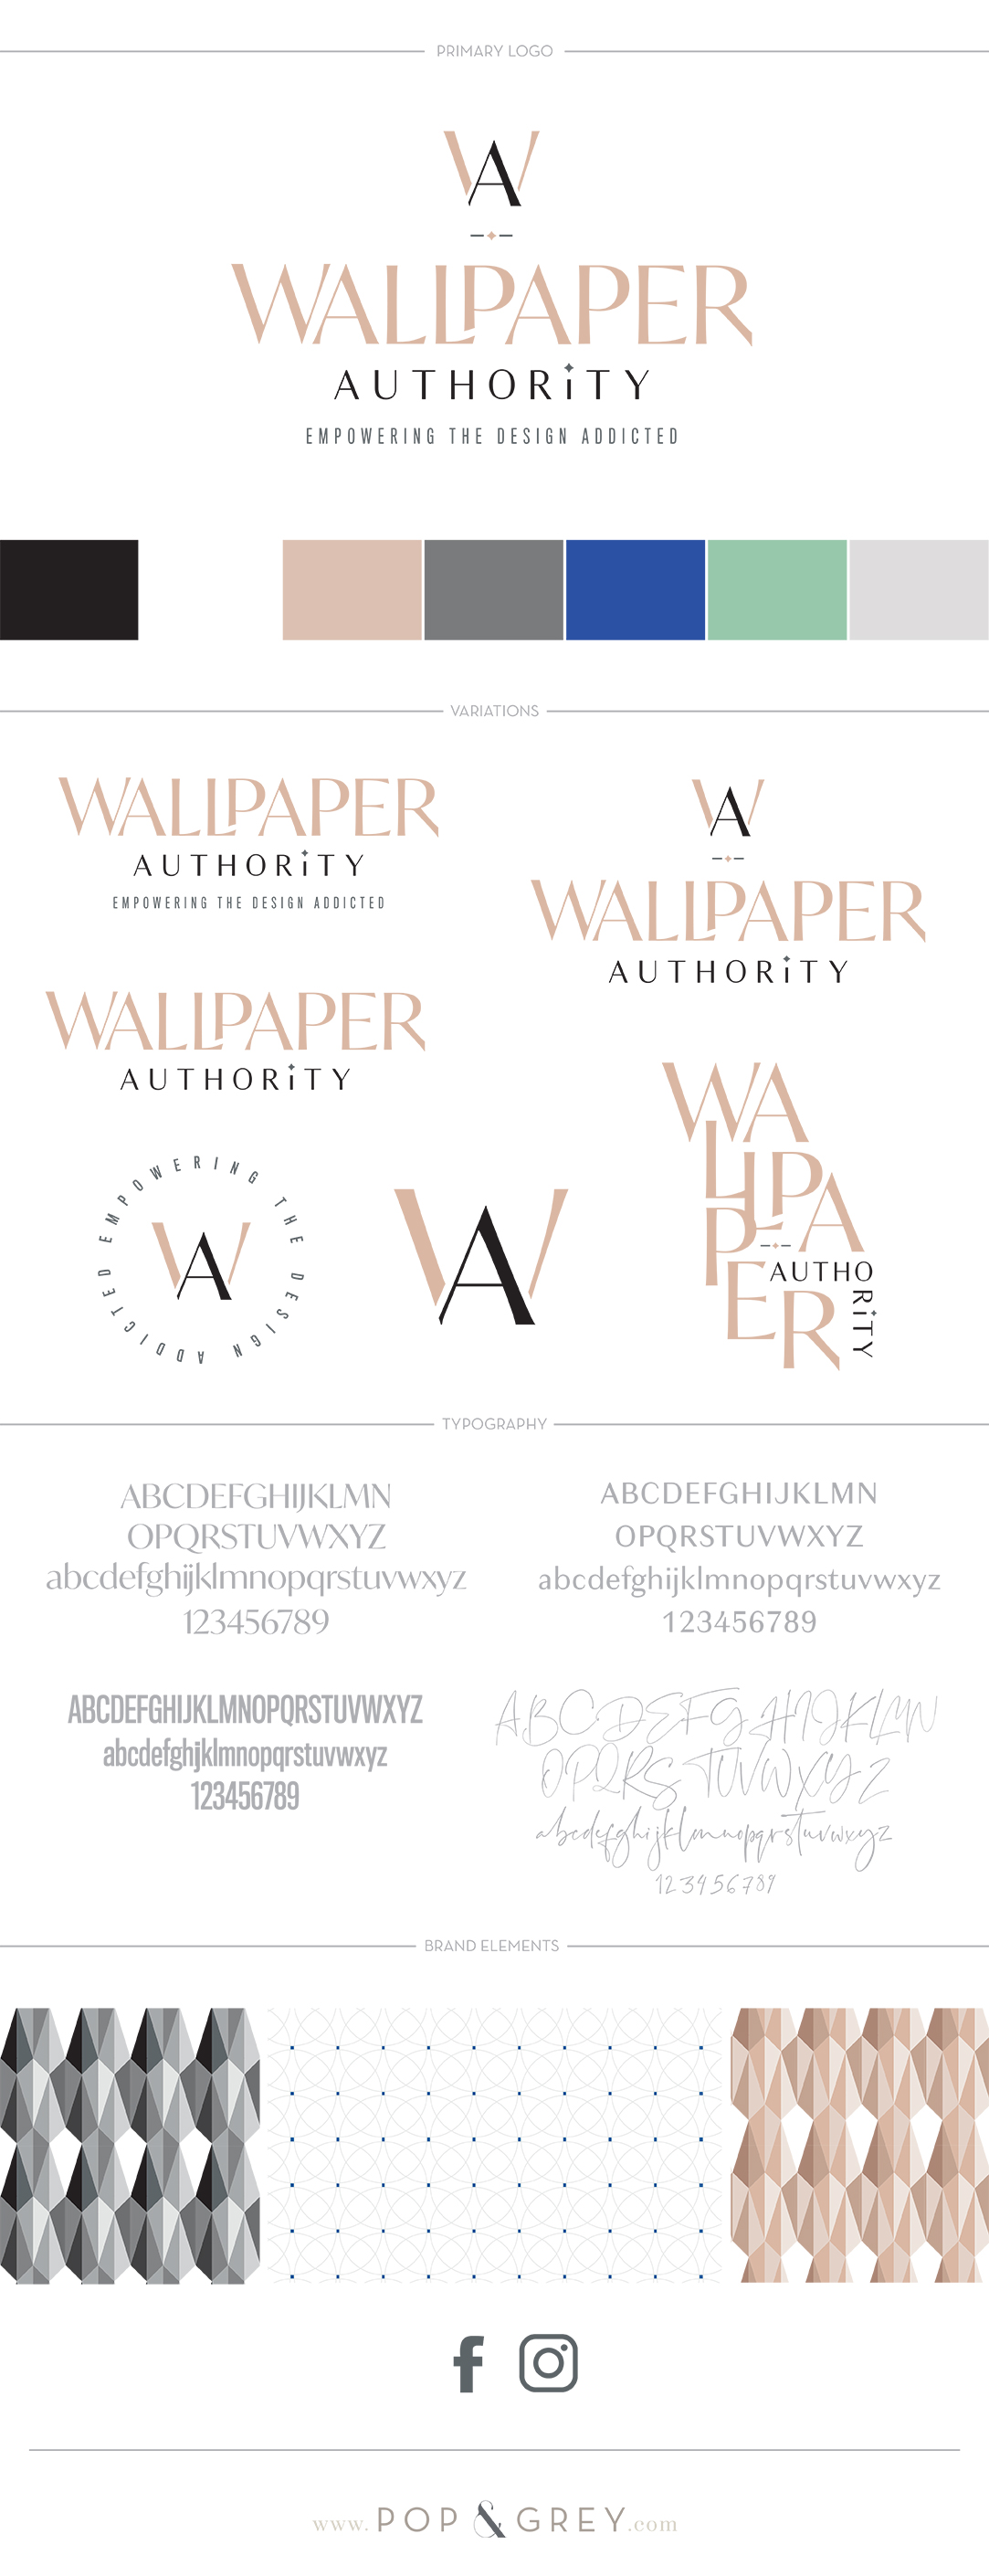 the wallpaper authority by lynai jones of mitchell black. brand by pop & grey